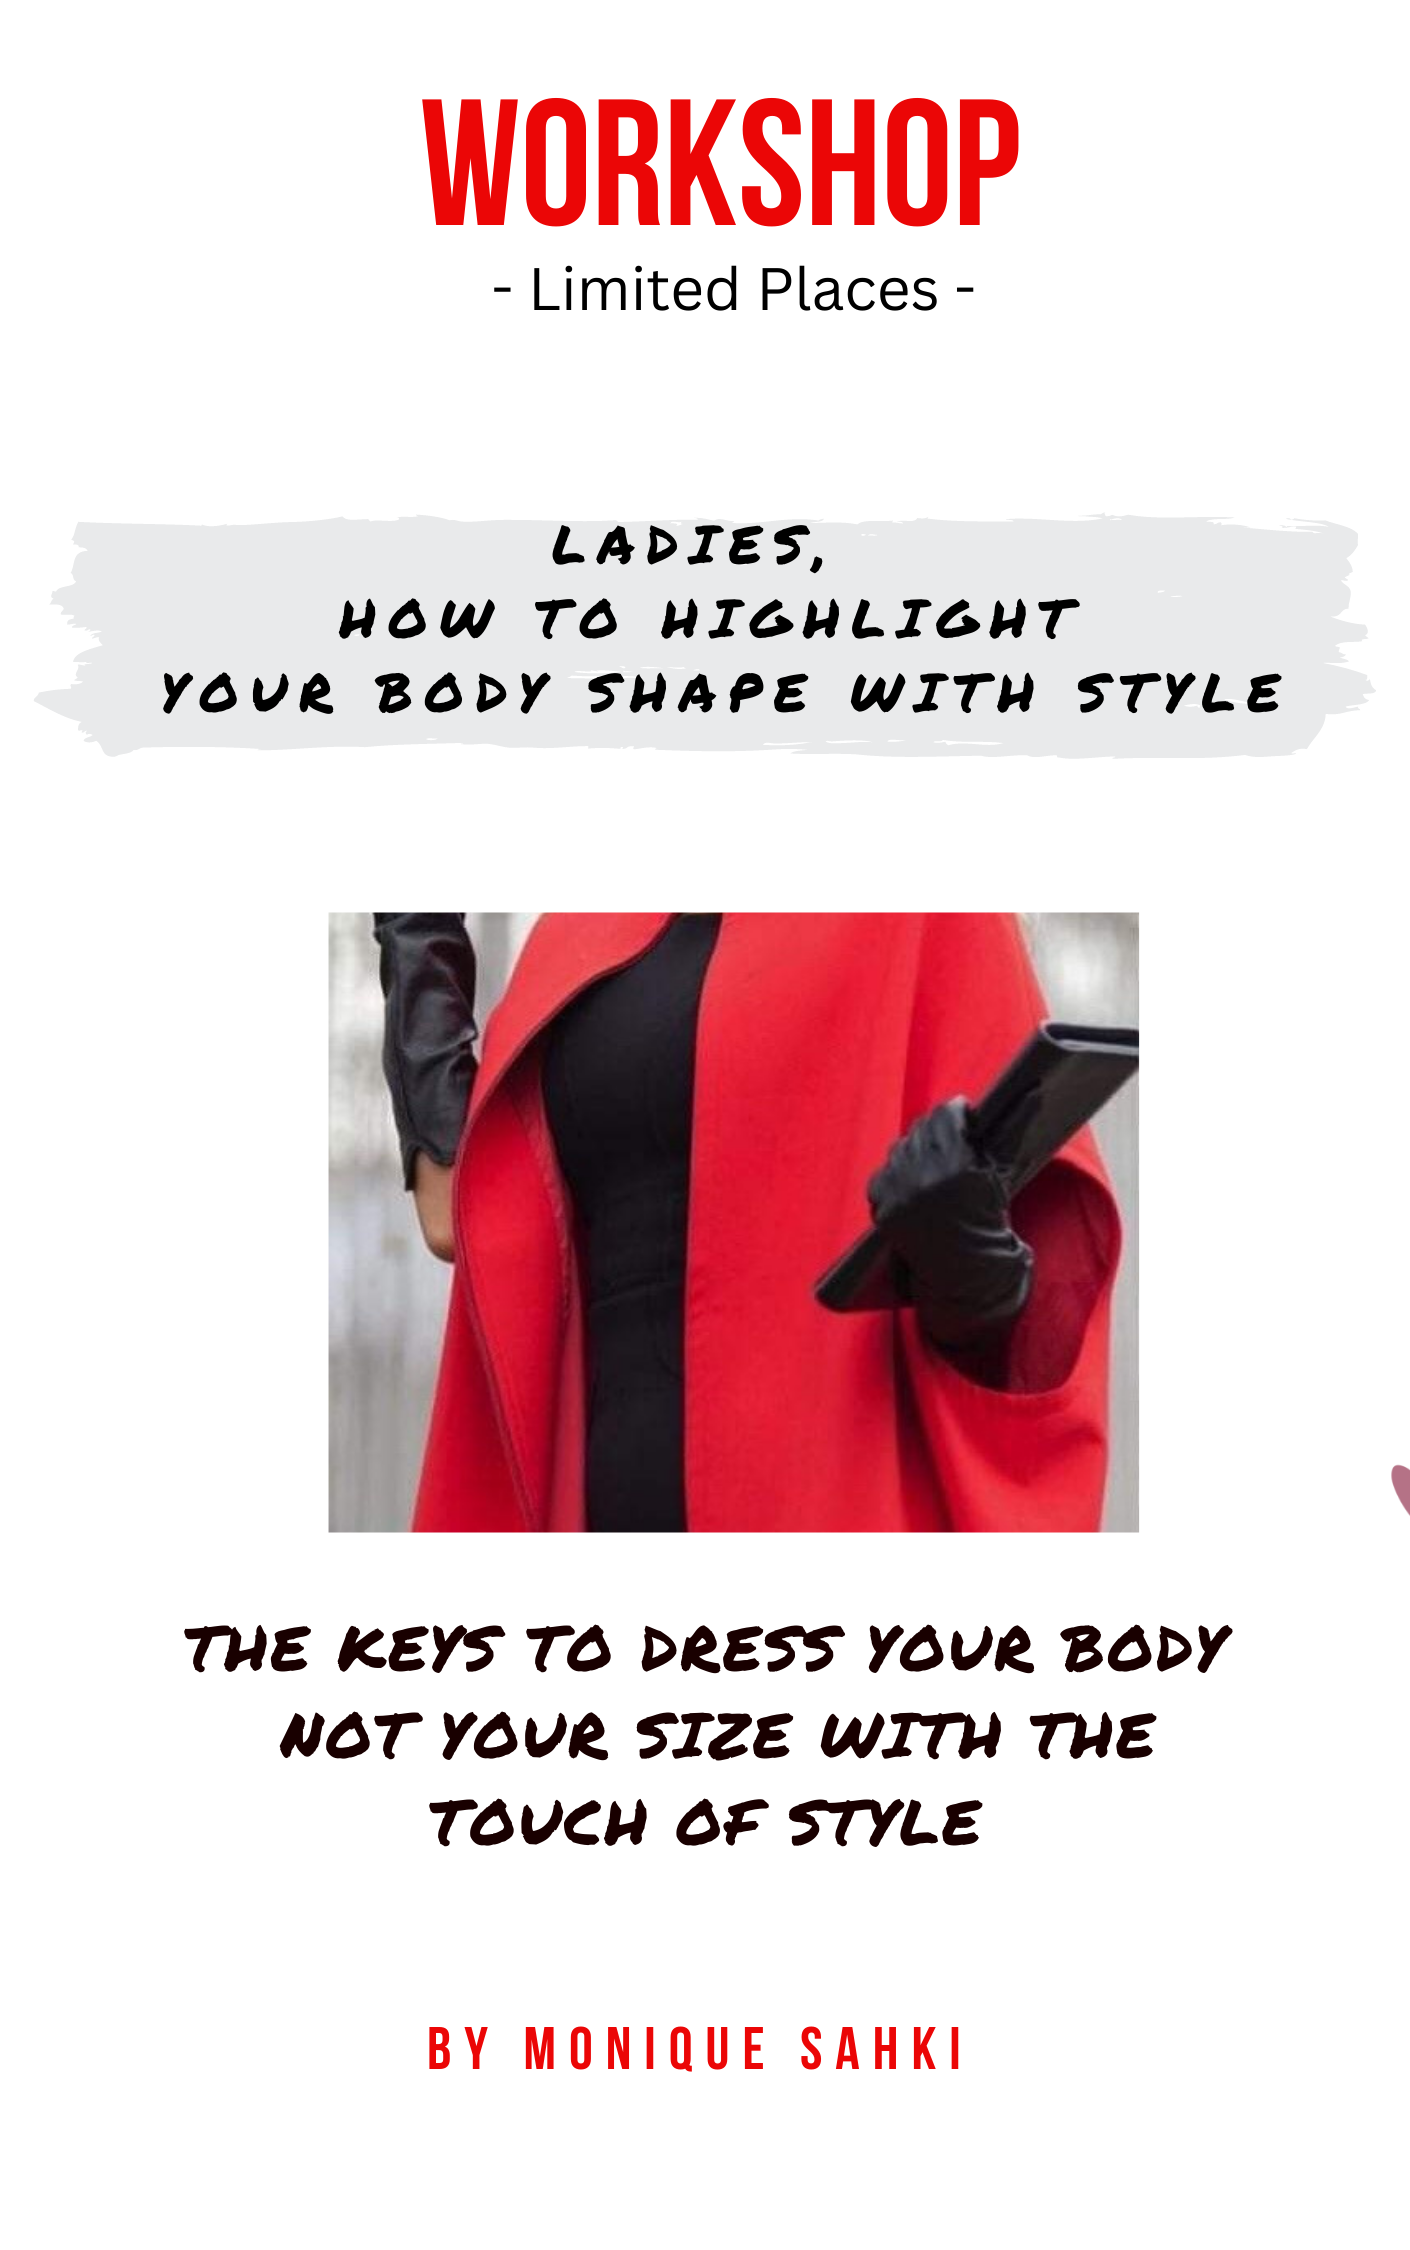 ladies, image how to highlight your body shape.png